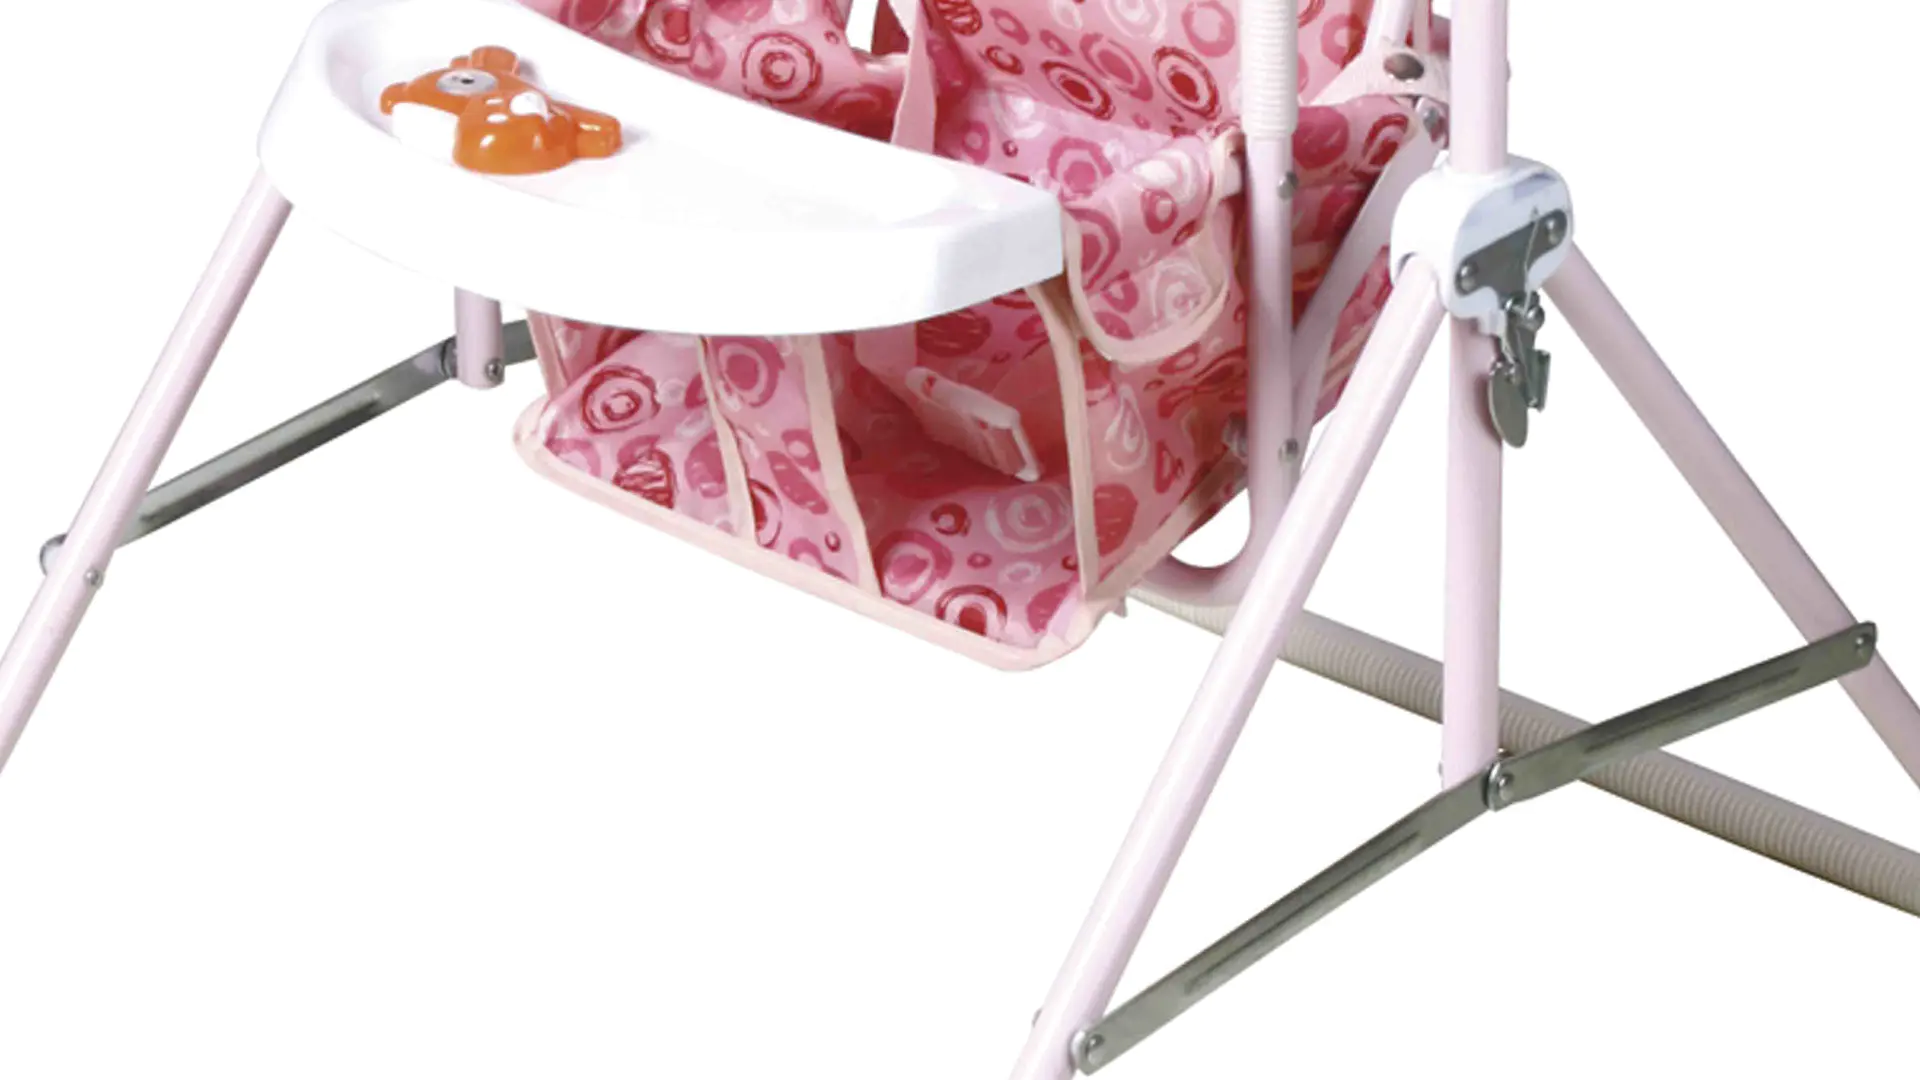 Aoqi baby musical swing chair inquire now for babys room